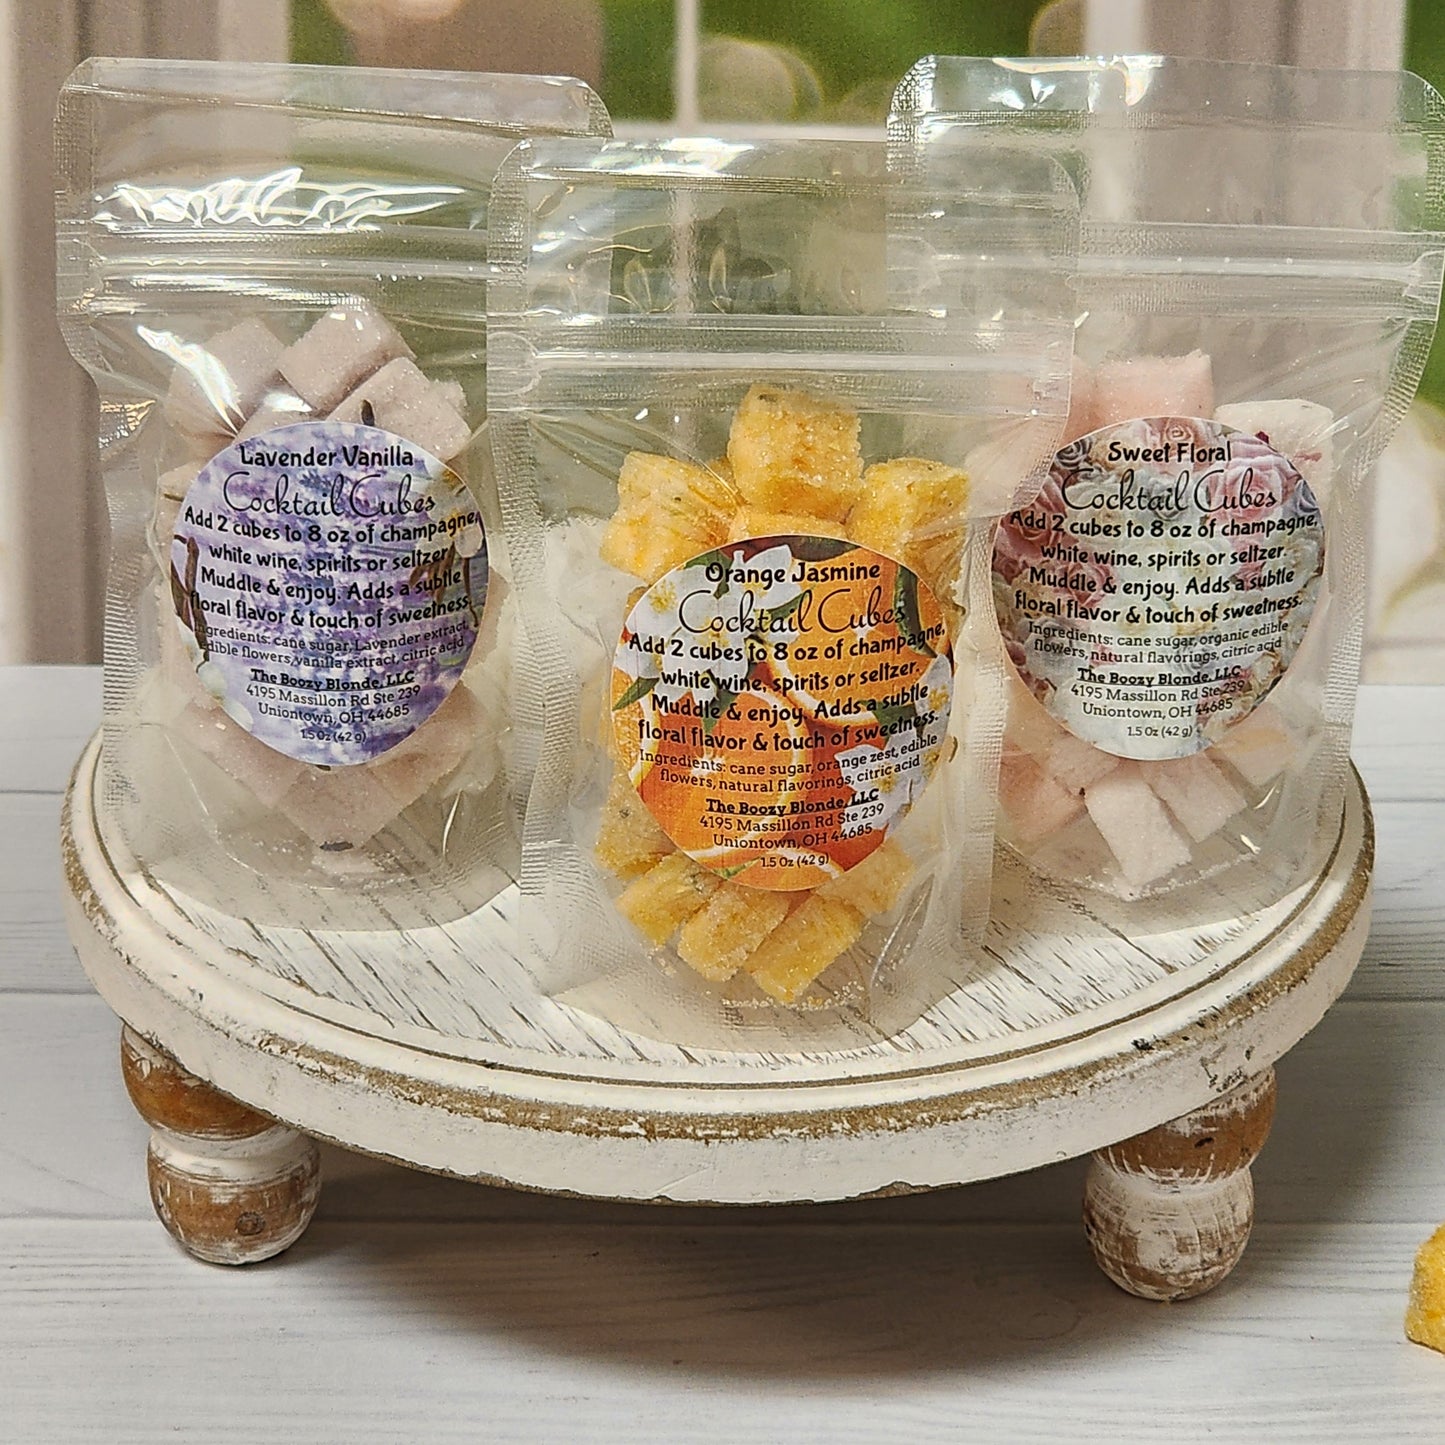 Cocktail Drops - Handmade Infused Sugar Cubes for Drinks